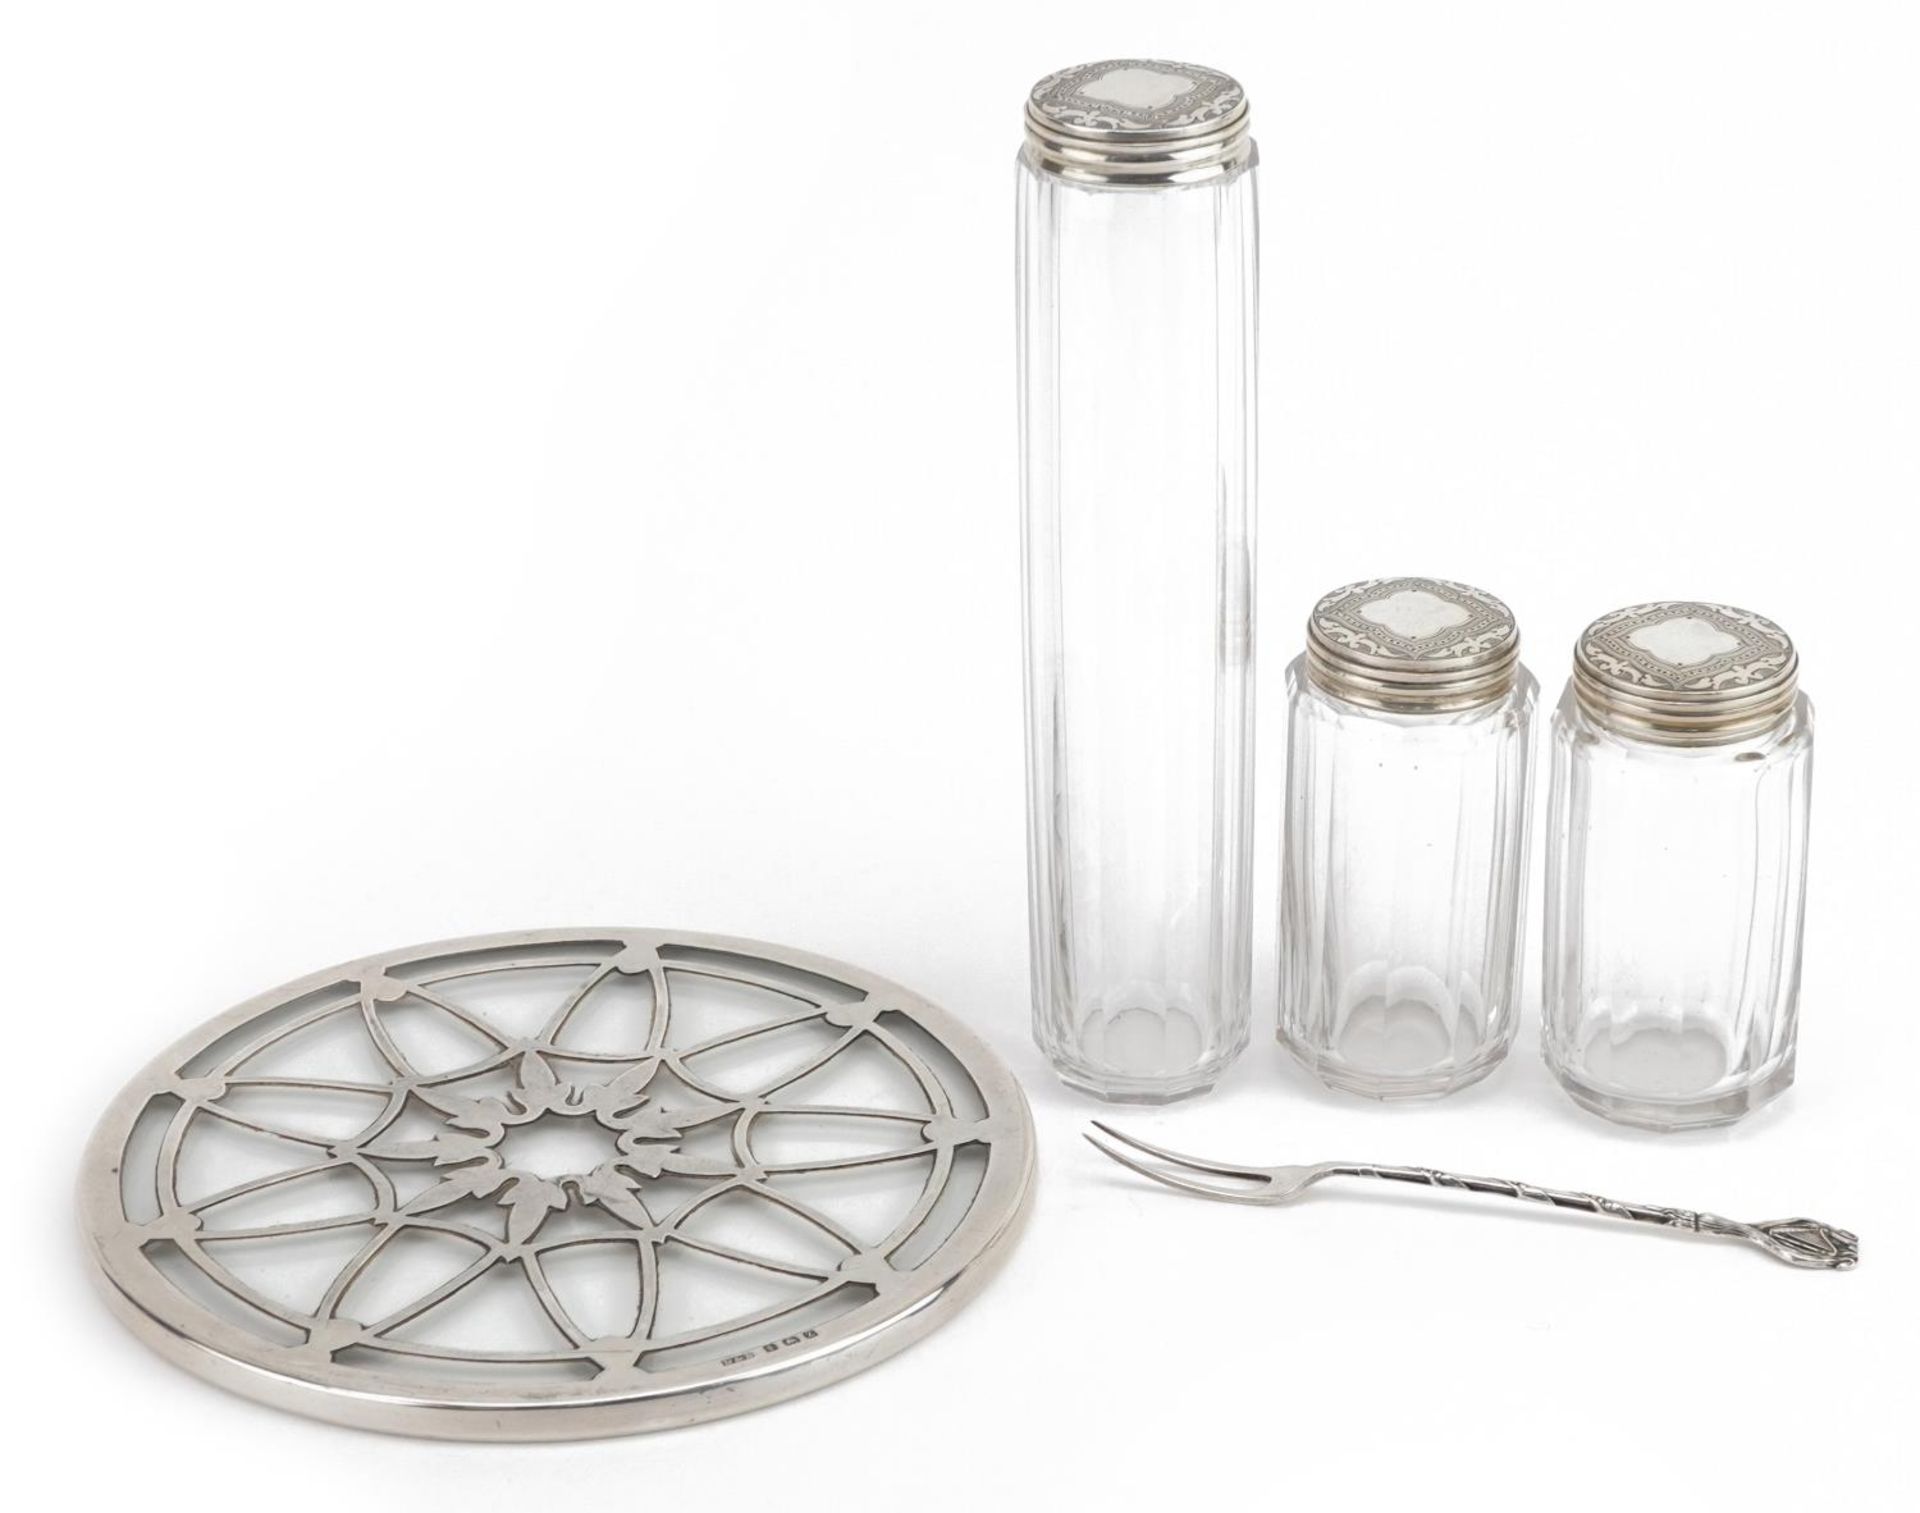 Three Victorian cut glass jars with silver lids, silver overlaid glass coaster and a silver fork,